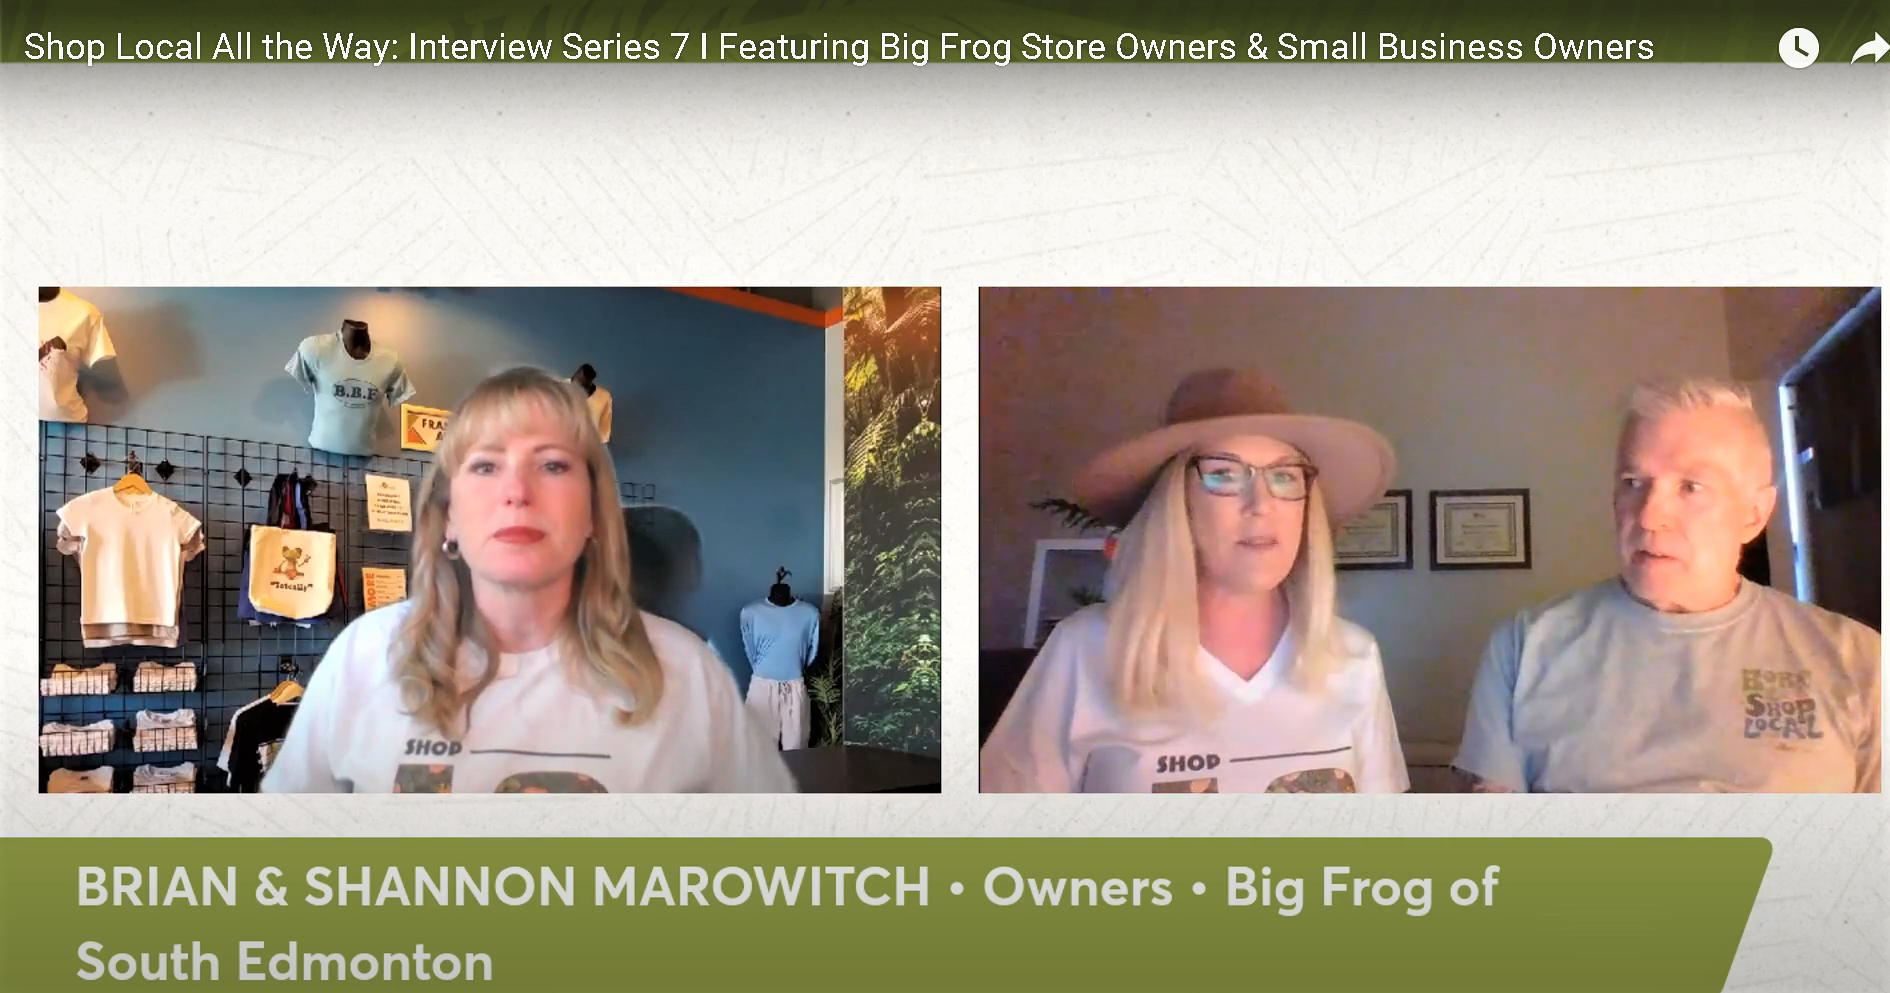 ig-Frog-of-South-Edmonton-Owners-Brian-and-Shannon-Marowitch-Shop-Local